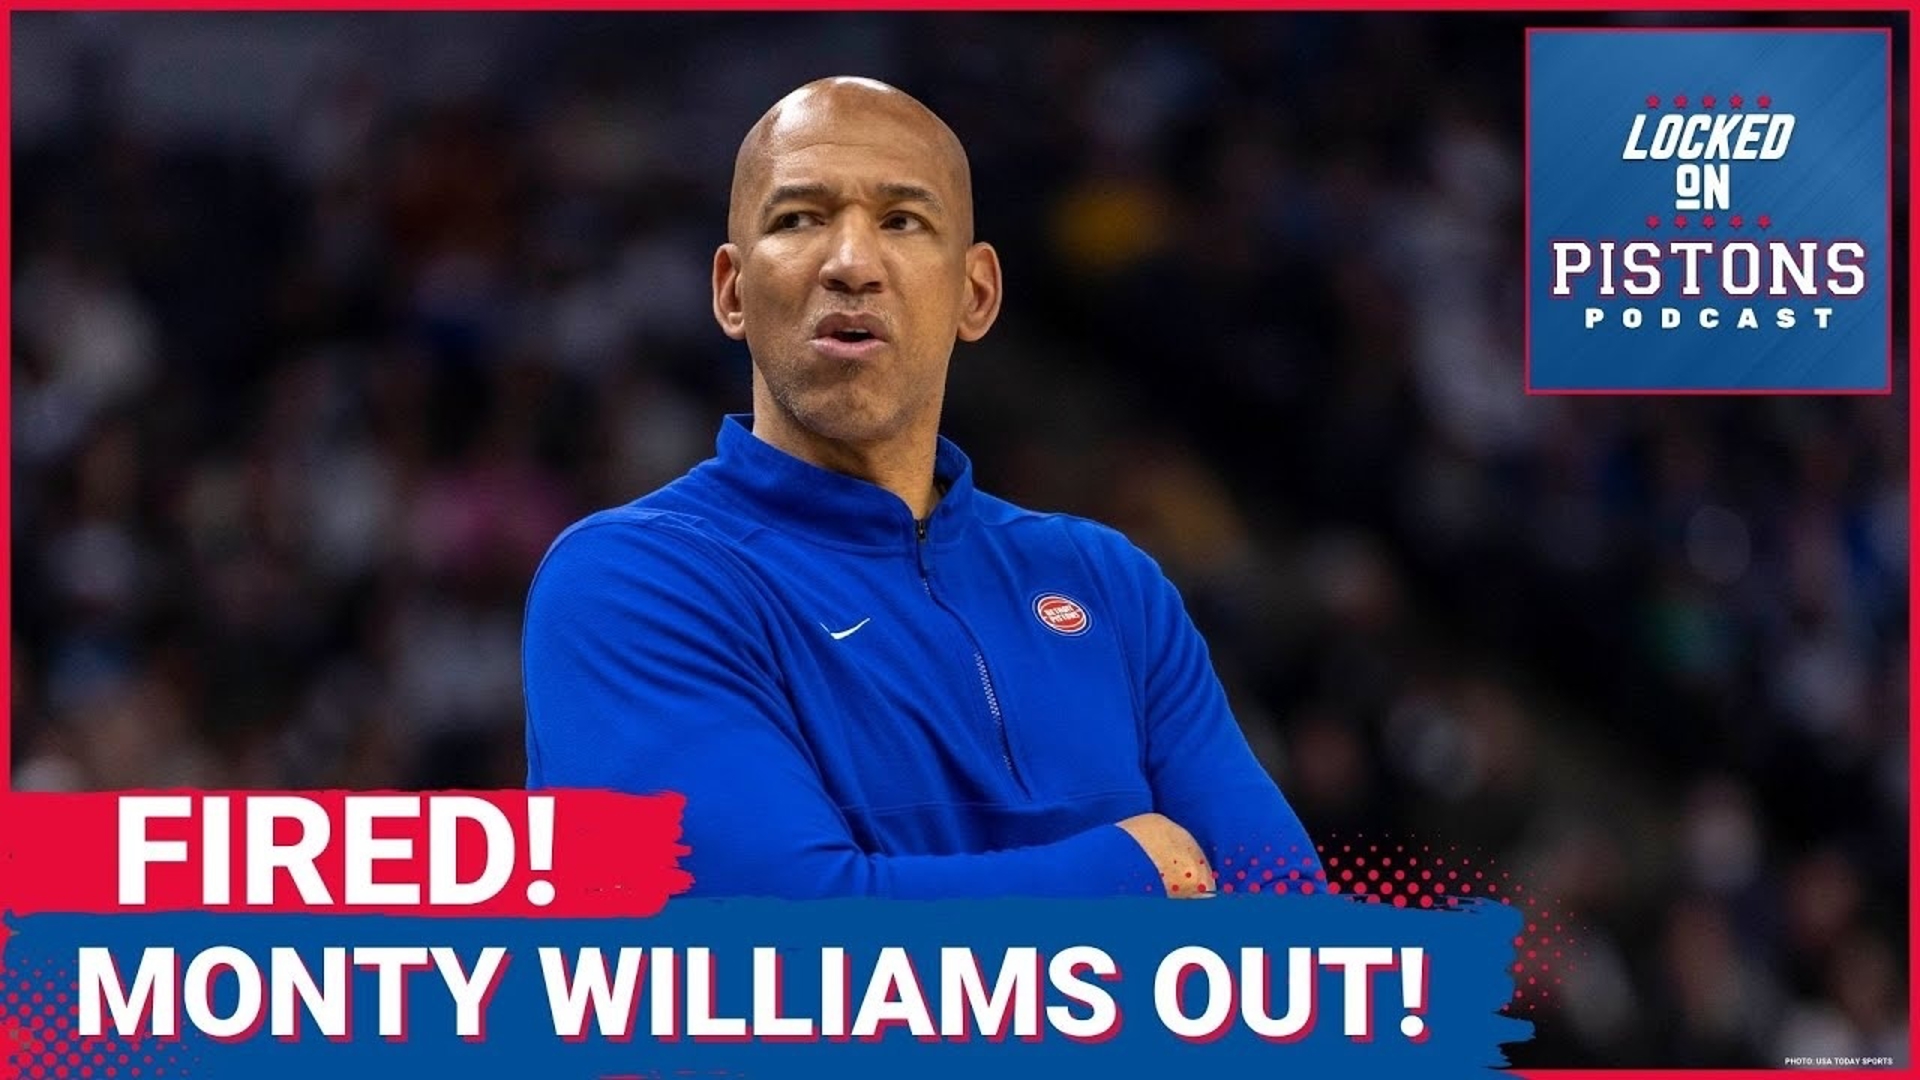 BREAKING NEWS: The Detroit Pistons ownership has decided to fire Monty Williams and start a completely new slate with Trajan Langdon.